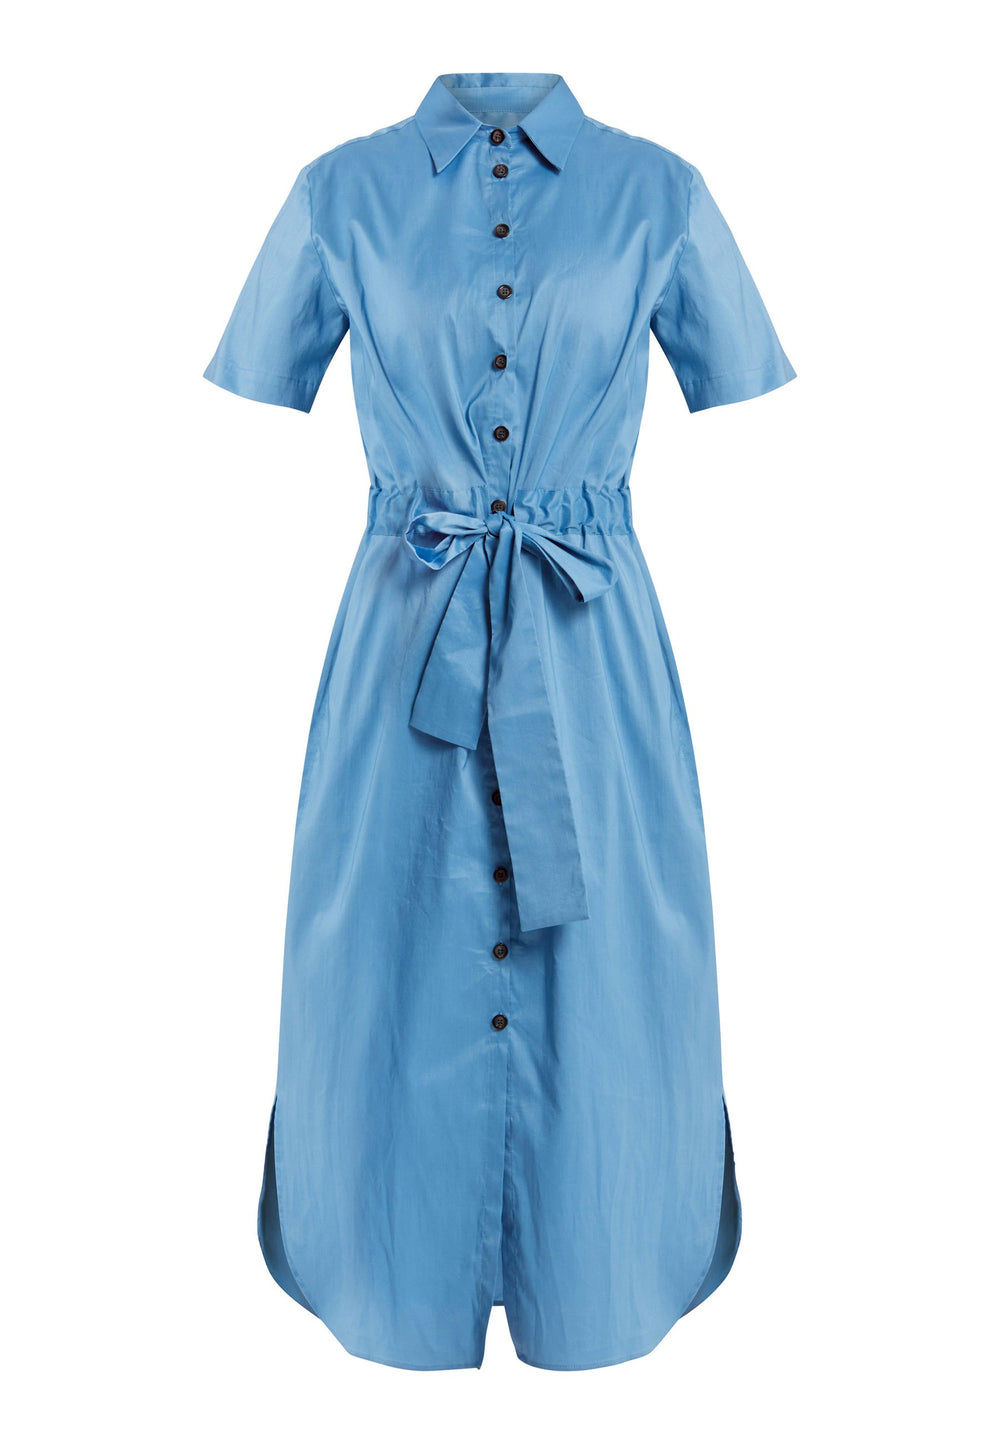 Arabella the ultimate shirtdress for everday. Cut in a glazed sky blue cotton poplin. Engineered with a classic round edge shirt hem. Drawstring matching belt accentuated the waist. This easy fit silhouette allows the fabric to fall softly over the hips and features essential side seam pockets.